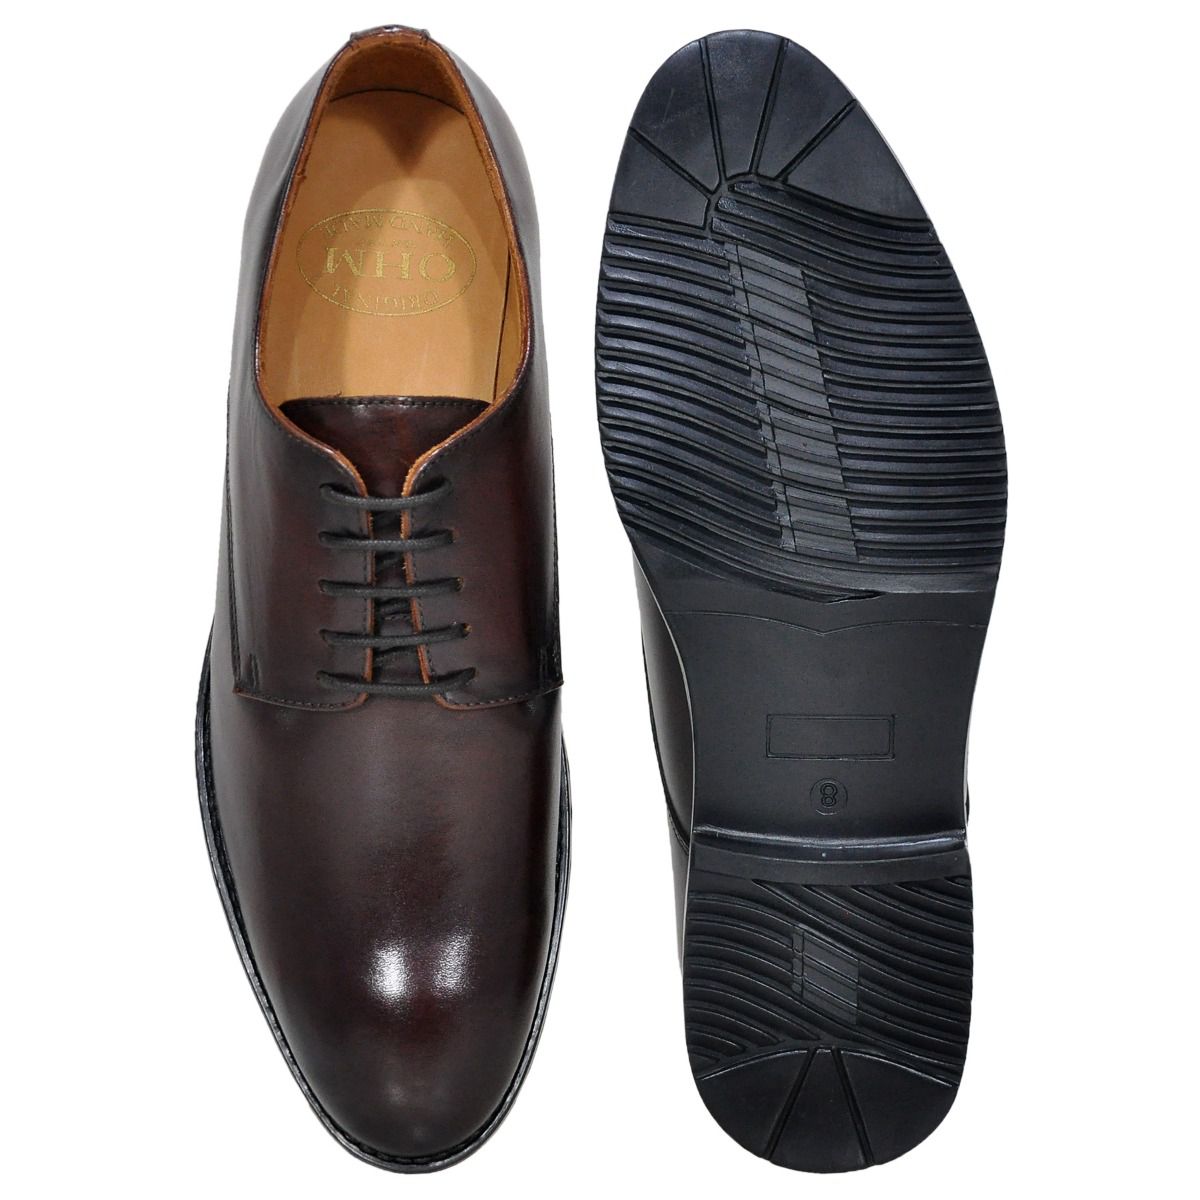 OHM New York Formal Dress Leather Shoes